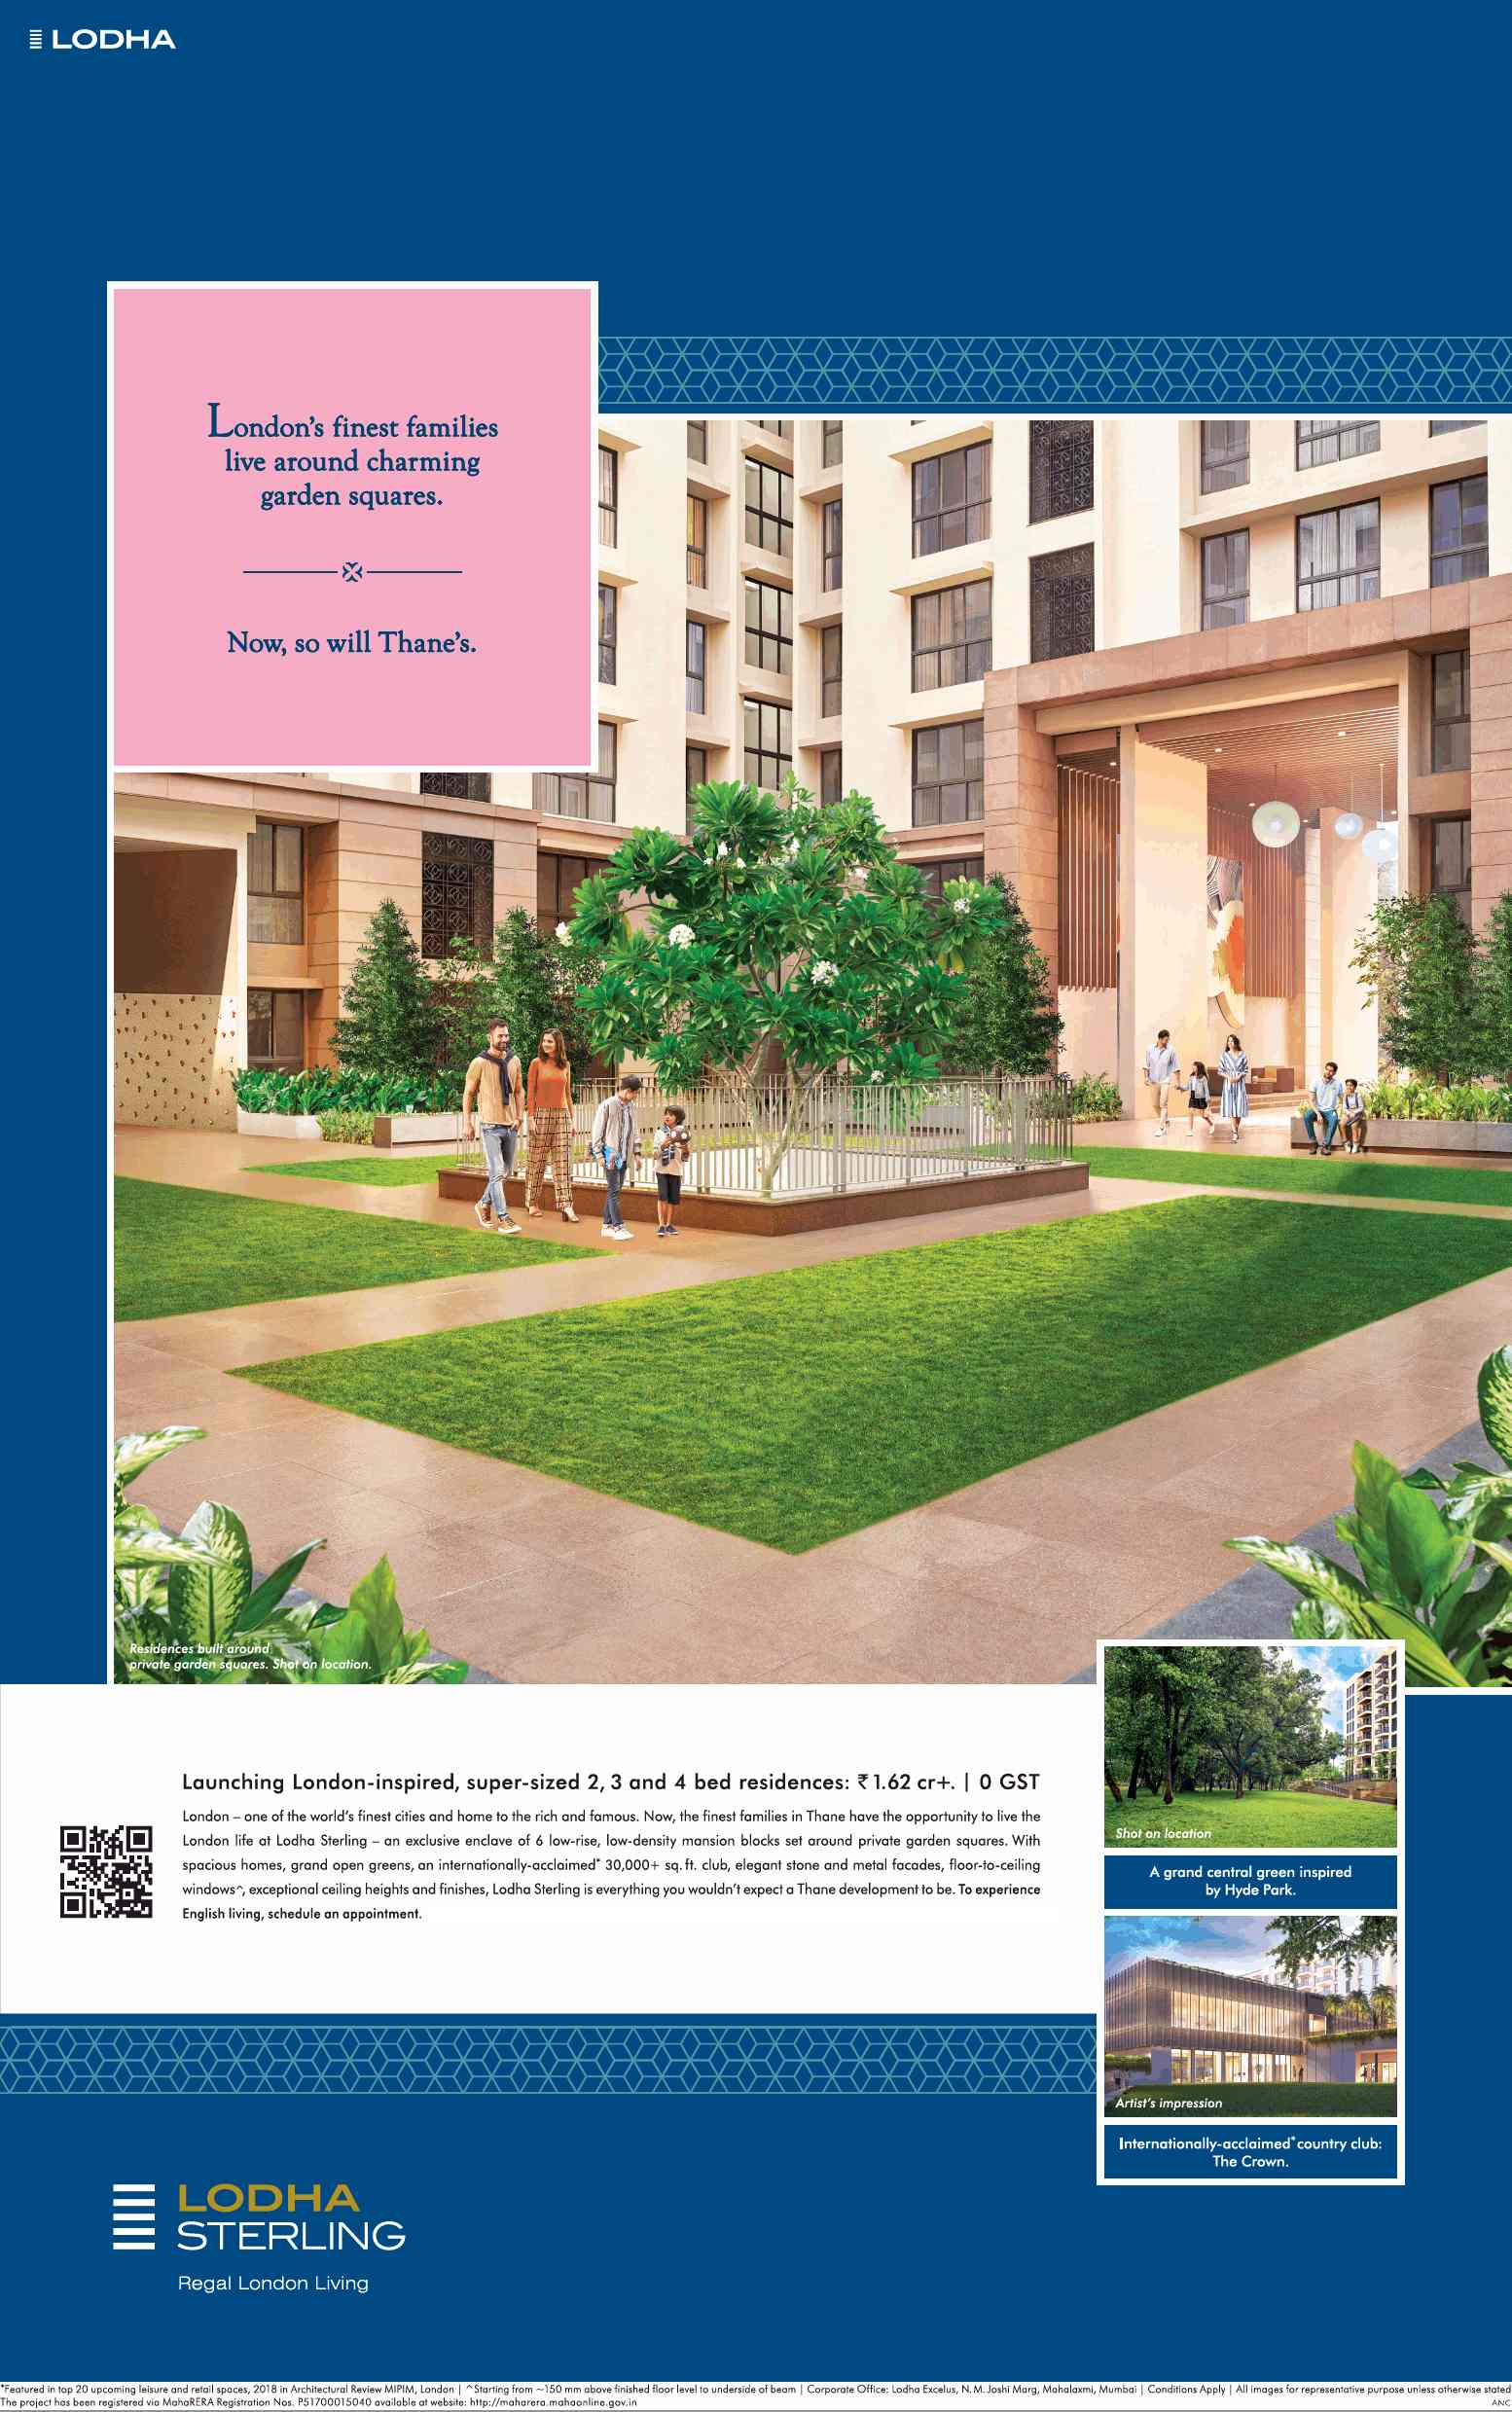 Reside in London inspired homes with private garden squares at Lodha Sterling in Mumbai Update